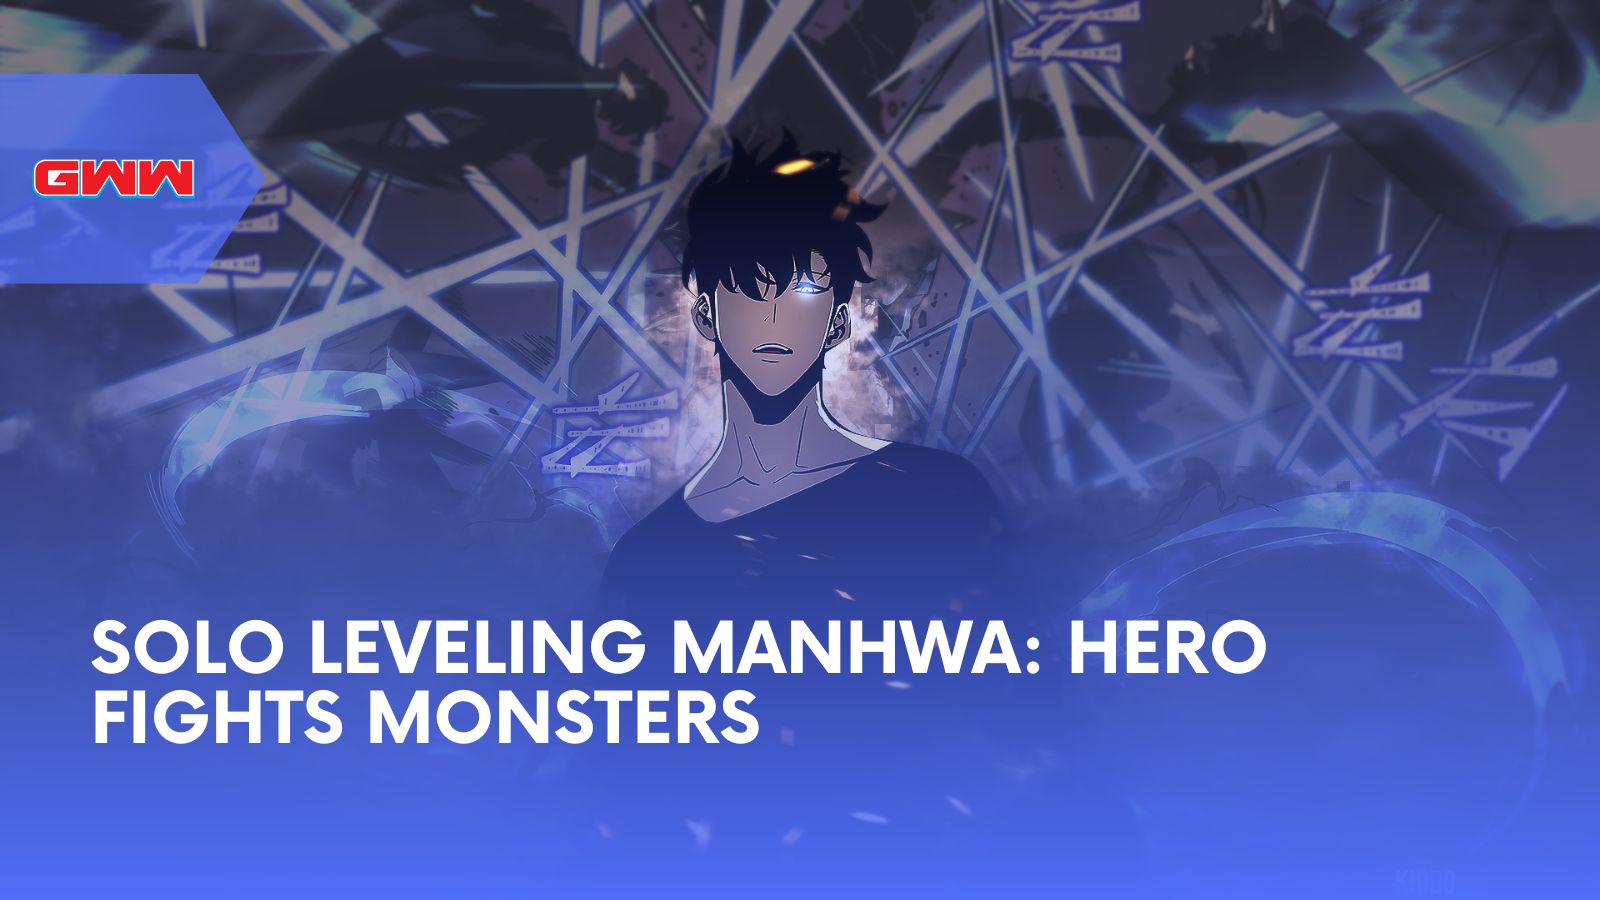 Solo Leveling Manhwa: Hero Fights Monsters